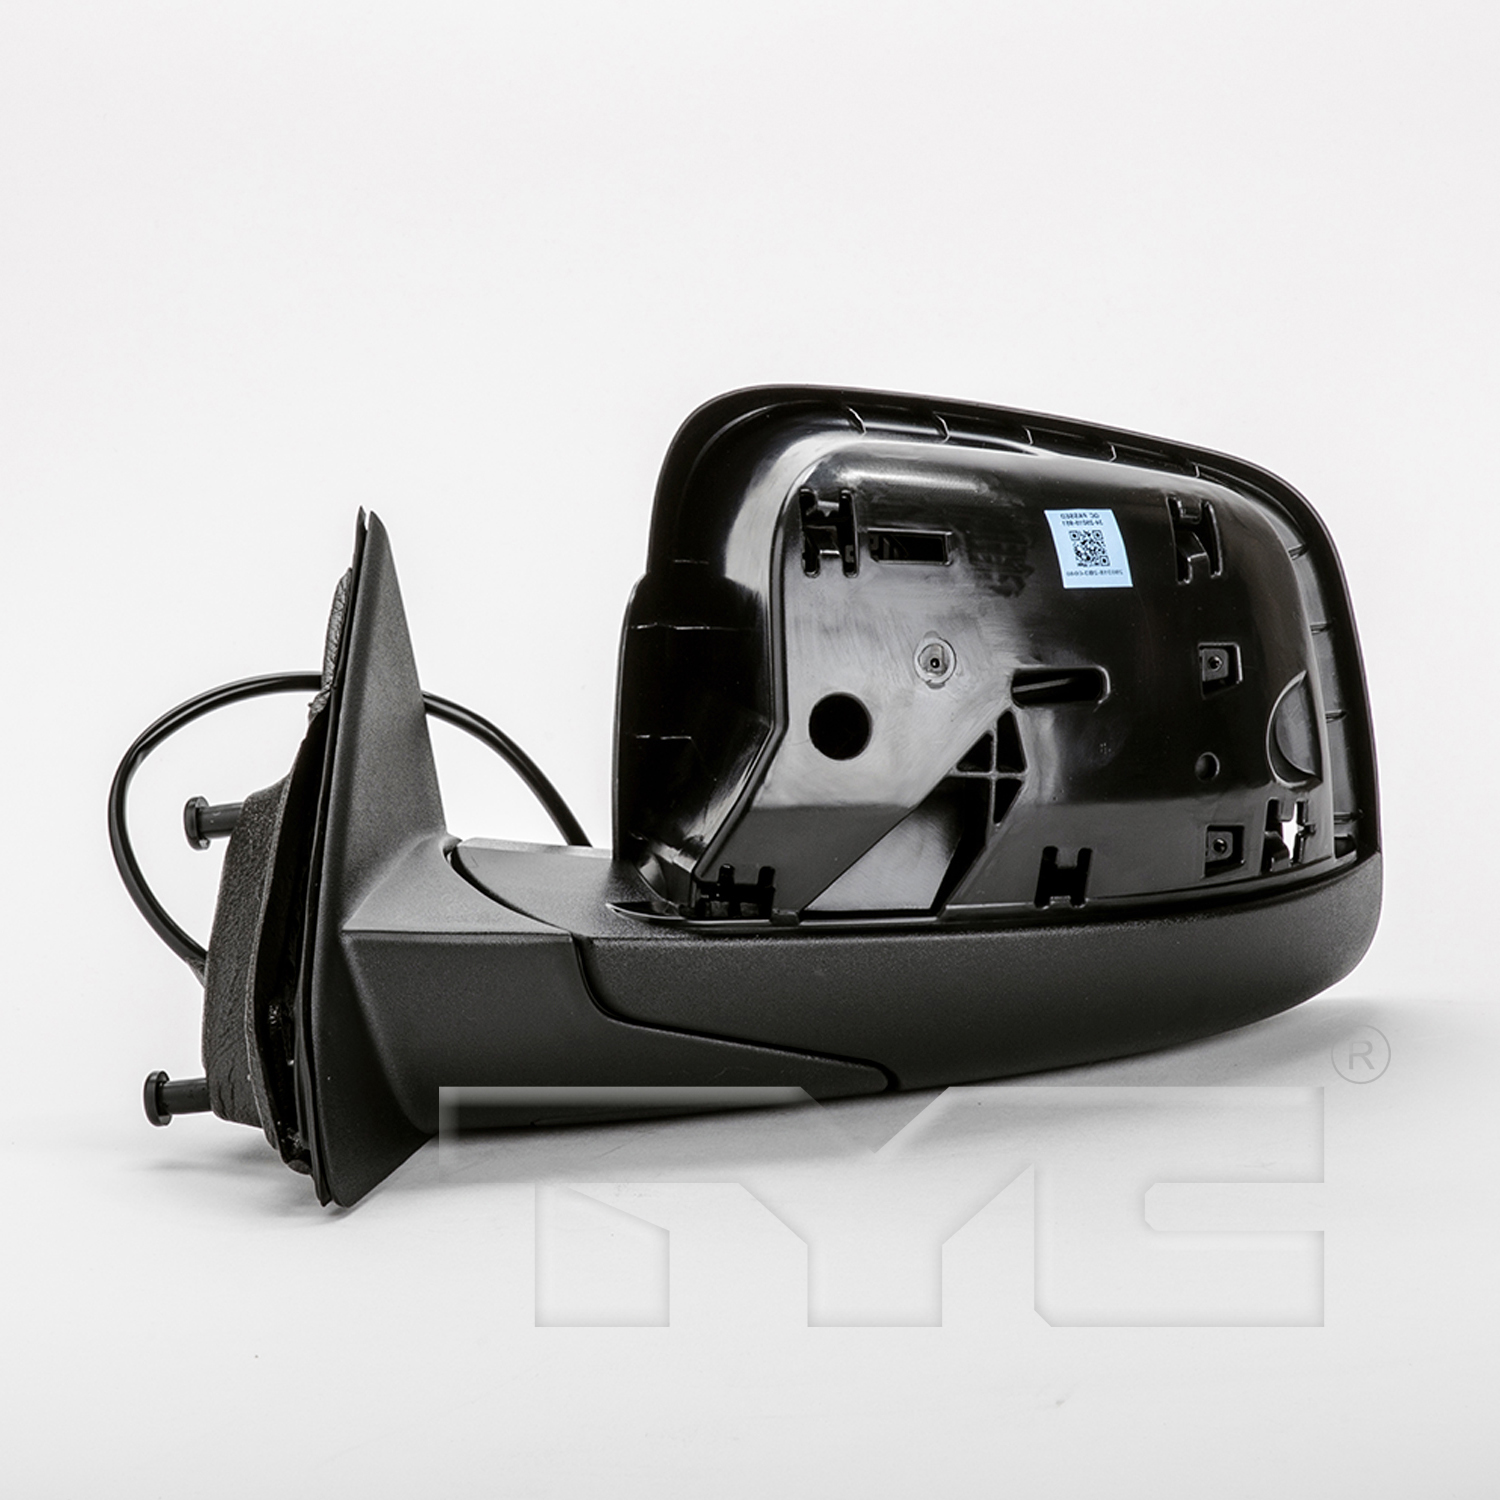 Aftermarket MIRRORS for JEEP - GRAND CHEROKEE, GRAND CHEROKEE,11-17,LT Mirror outside rear view